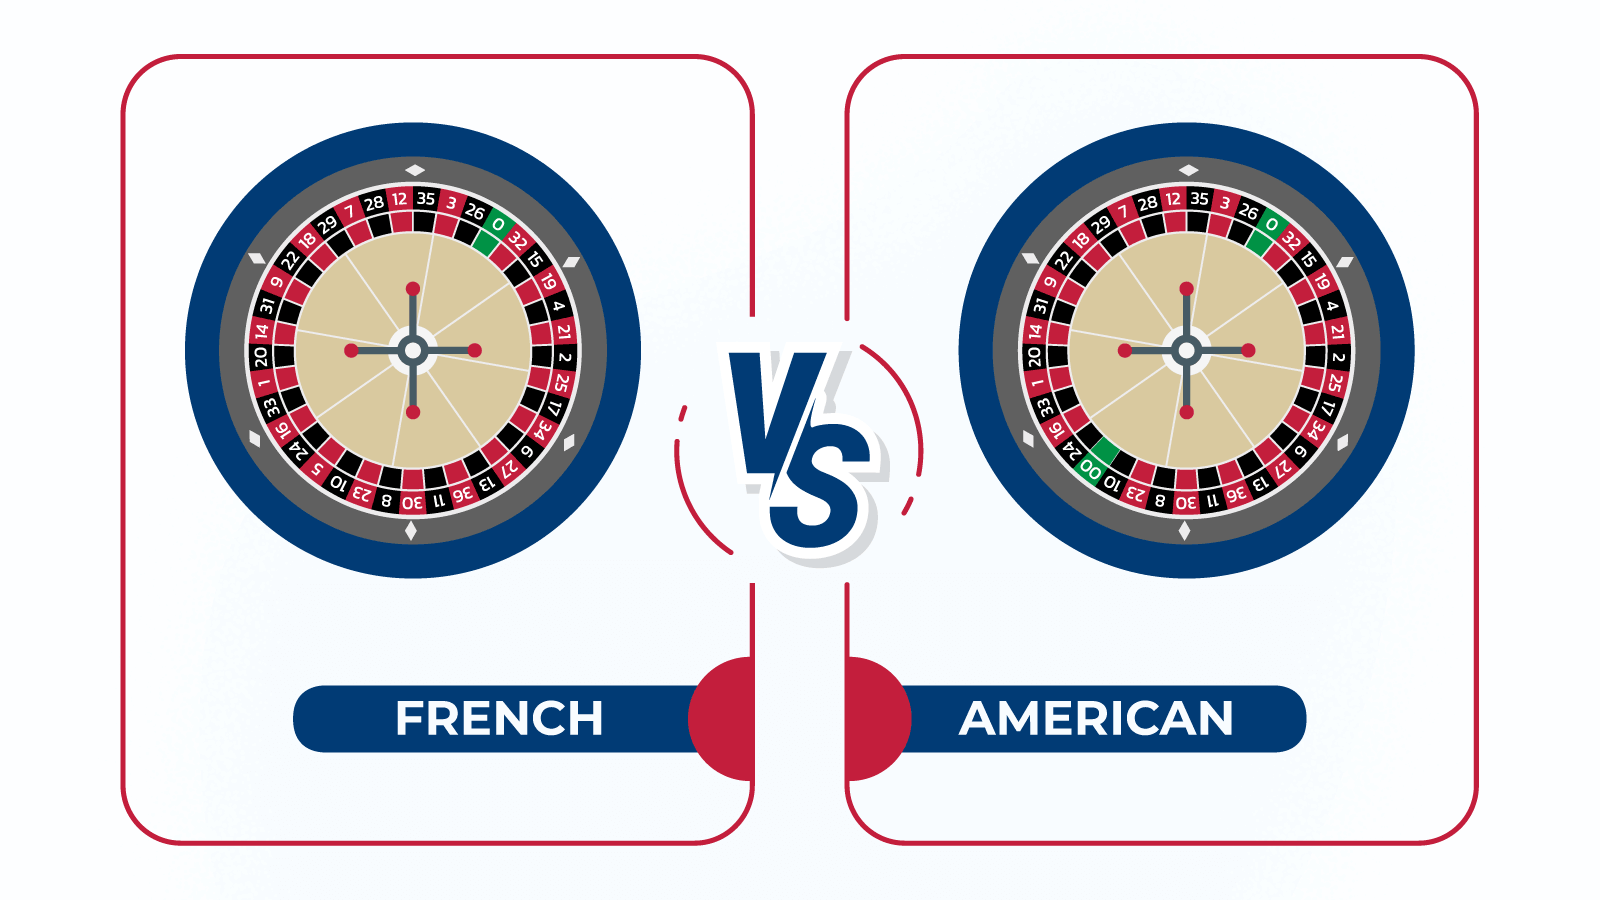 Differences Between French and American Roulette